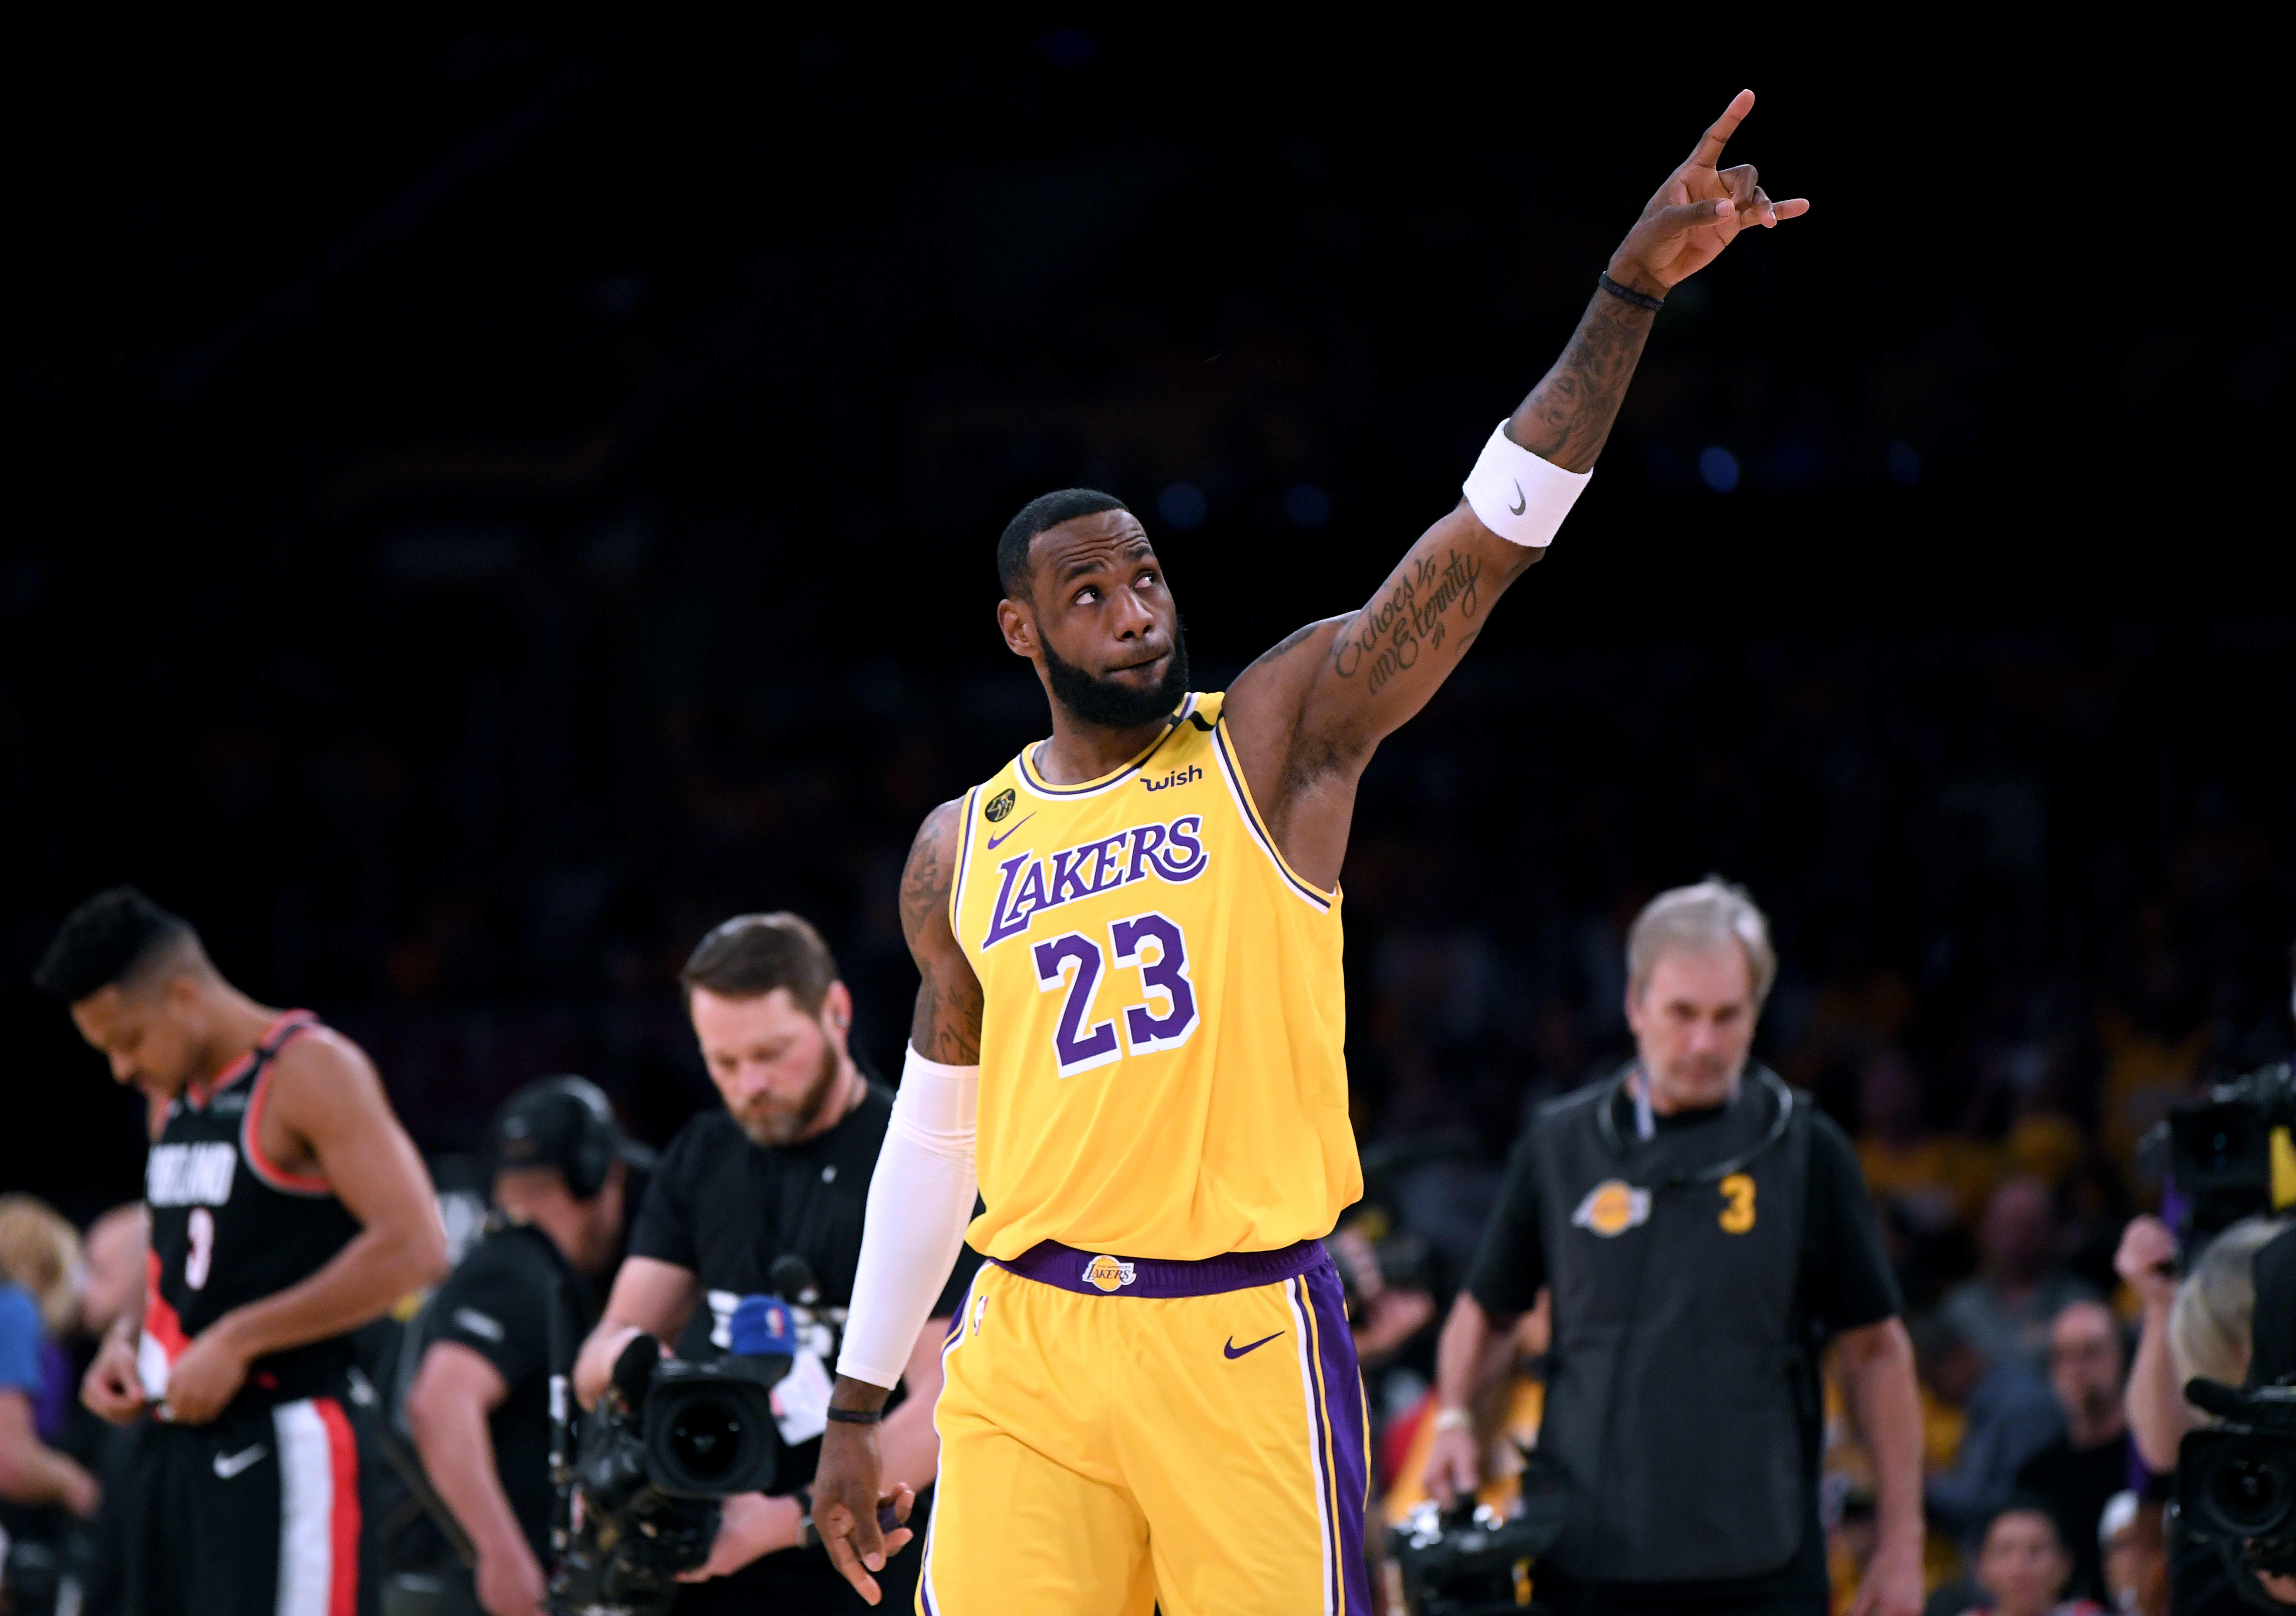 FIRST LOOK: Los Angeles Lakers star LeBron James is changing his